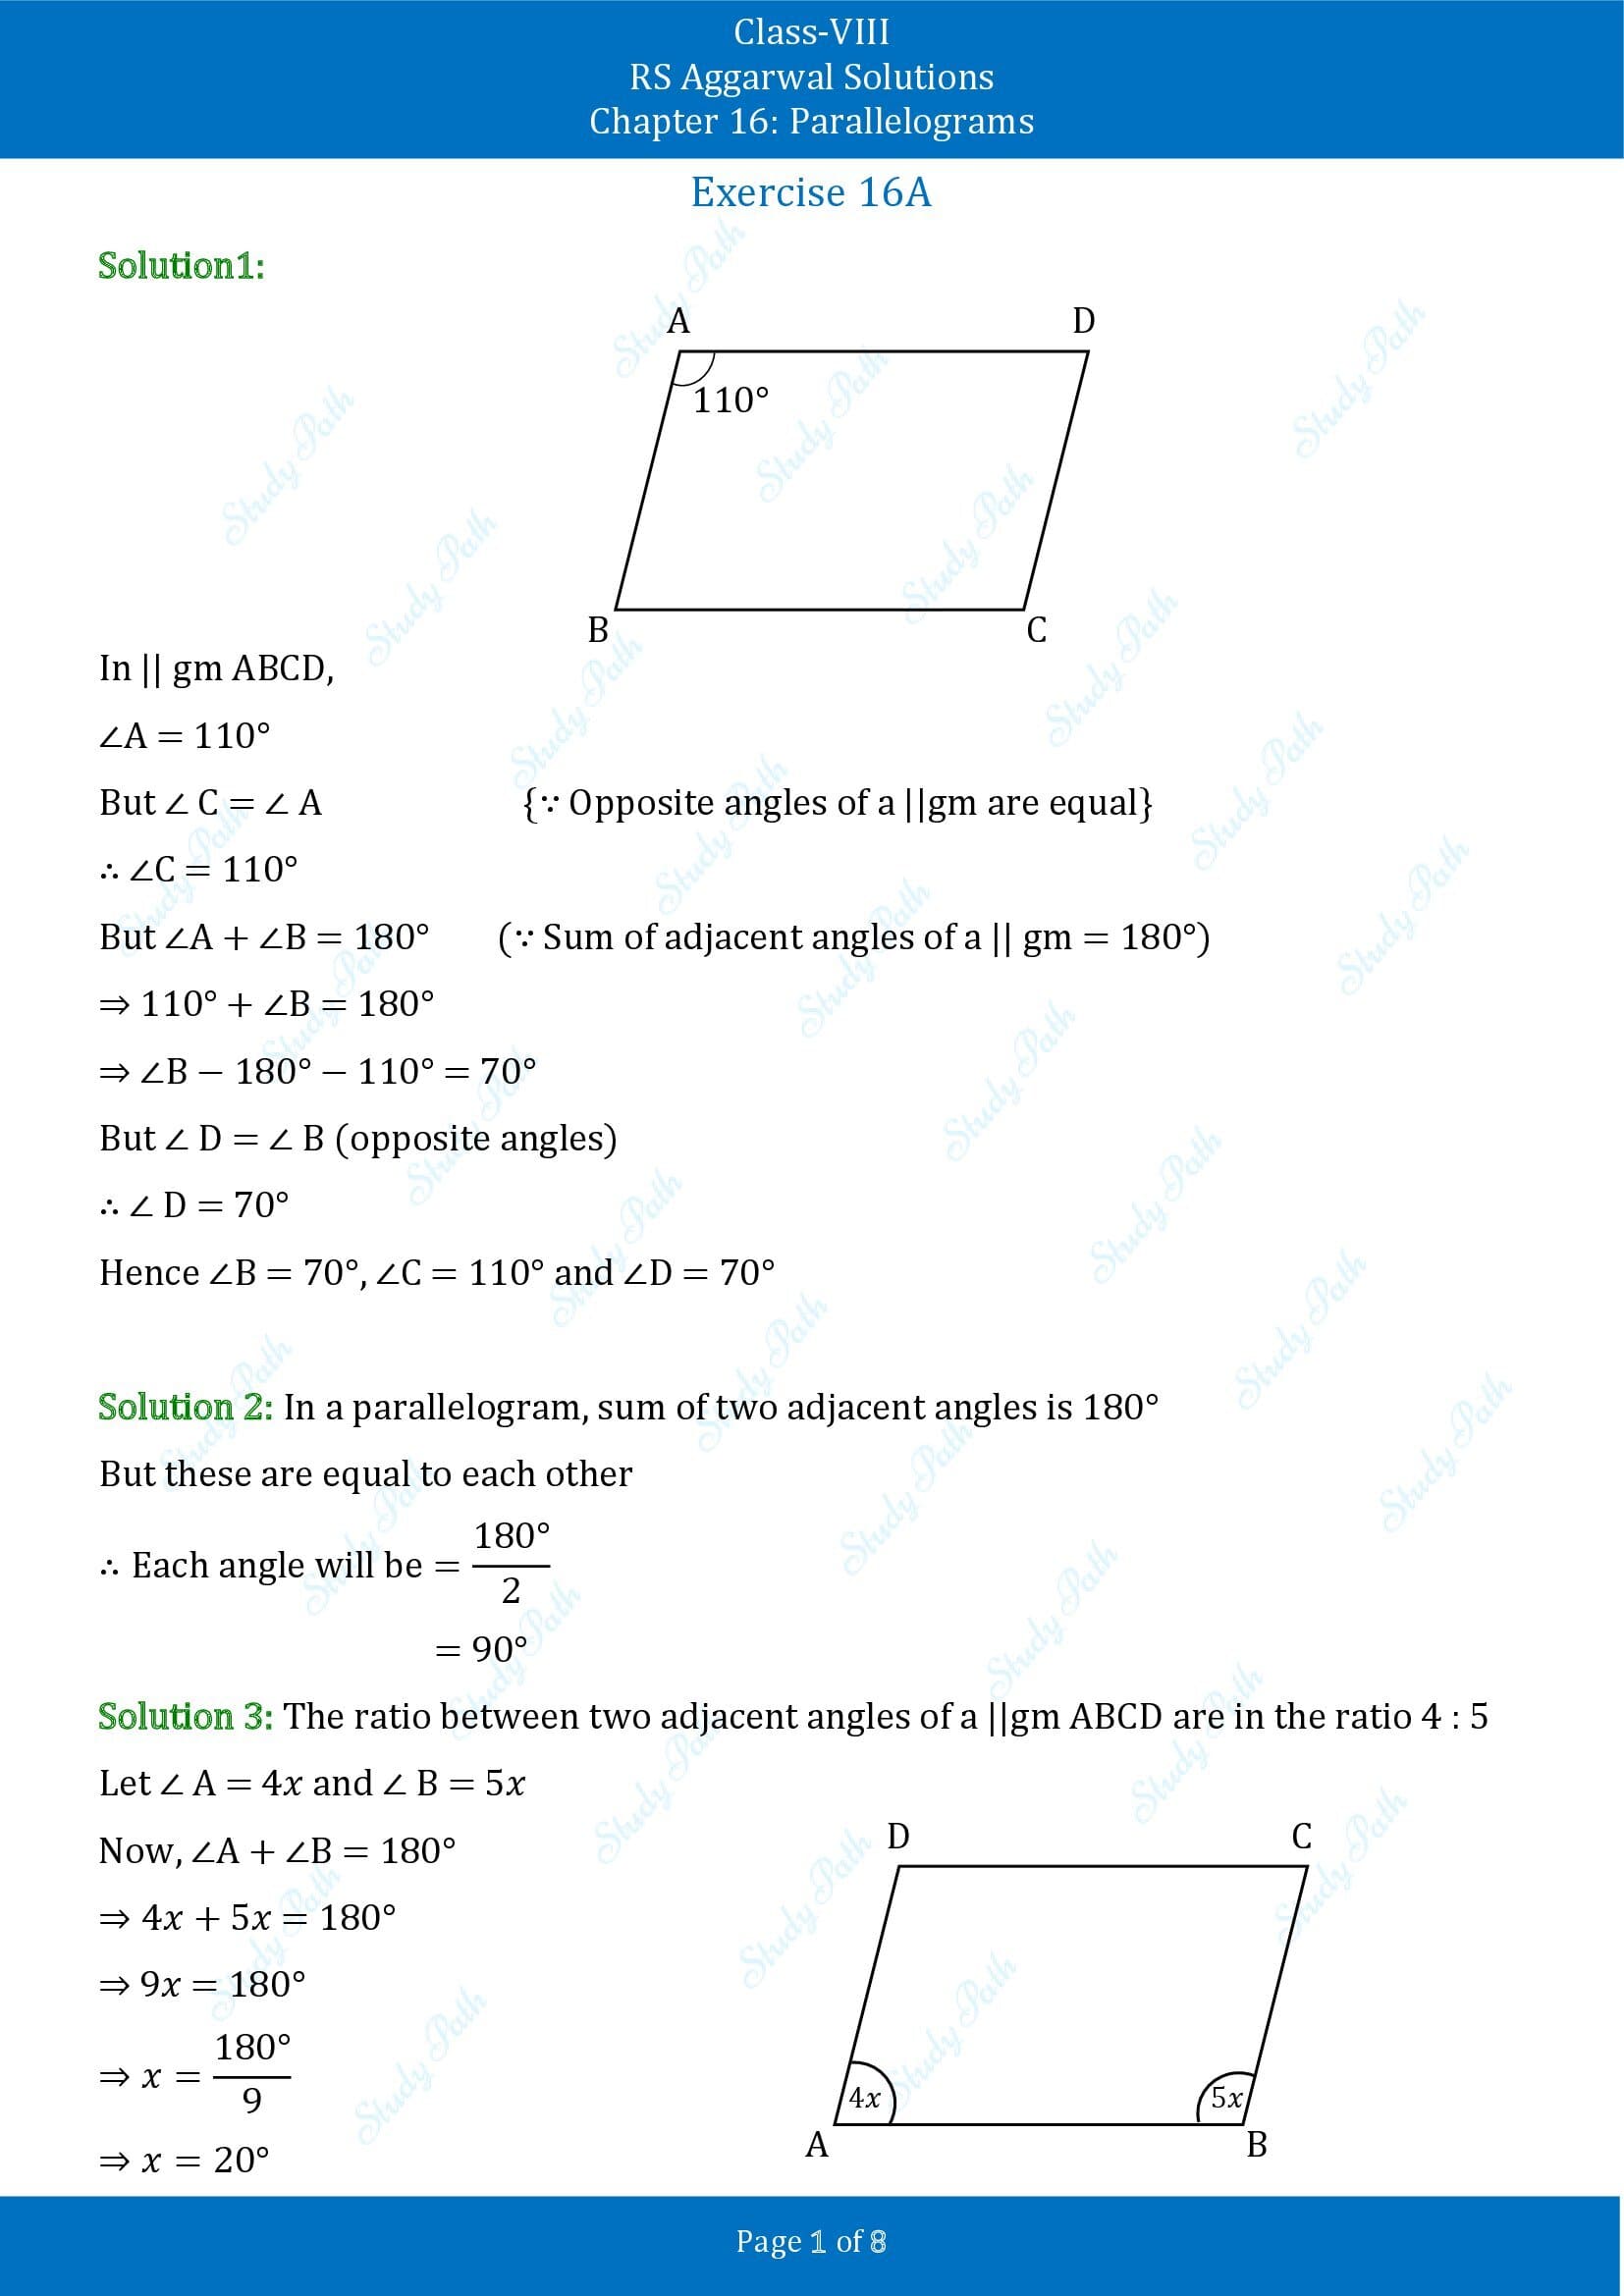 RS Aggarwal Solutions Class 8 Chapter 16 Parallelograms Exercise 16A 00001